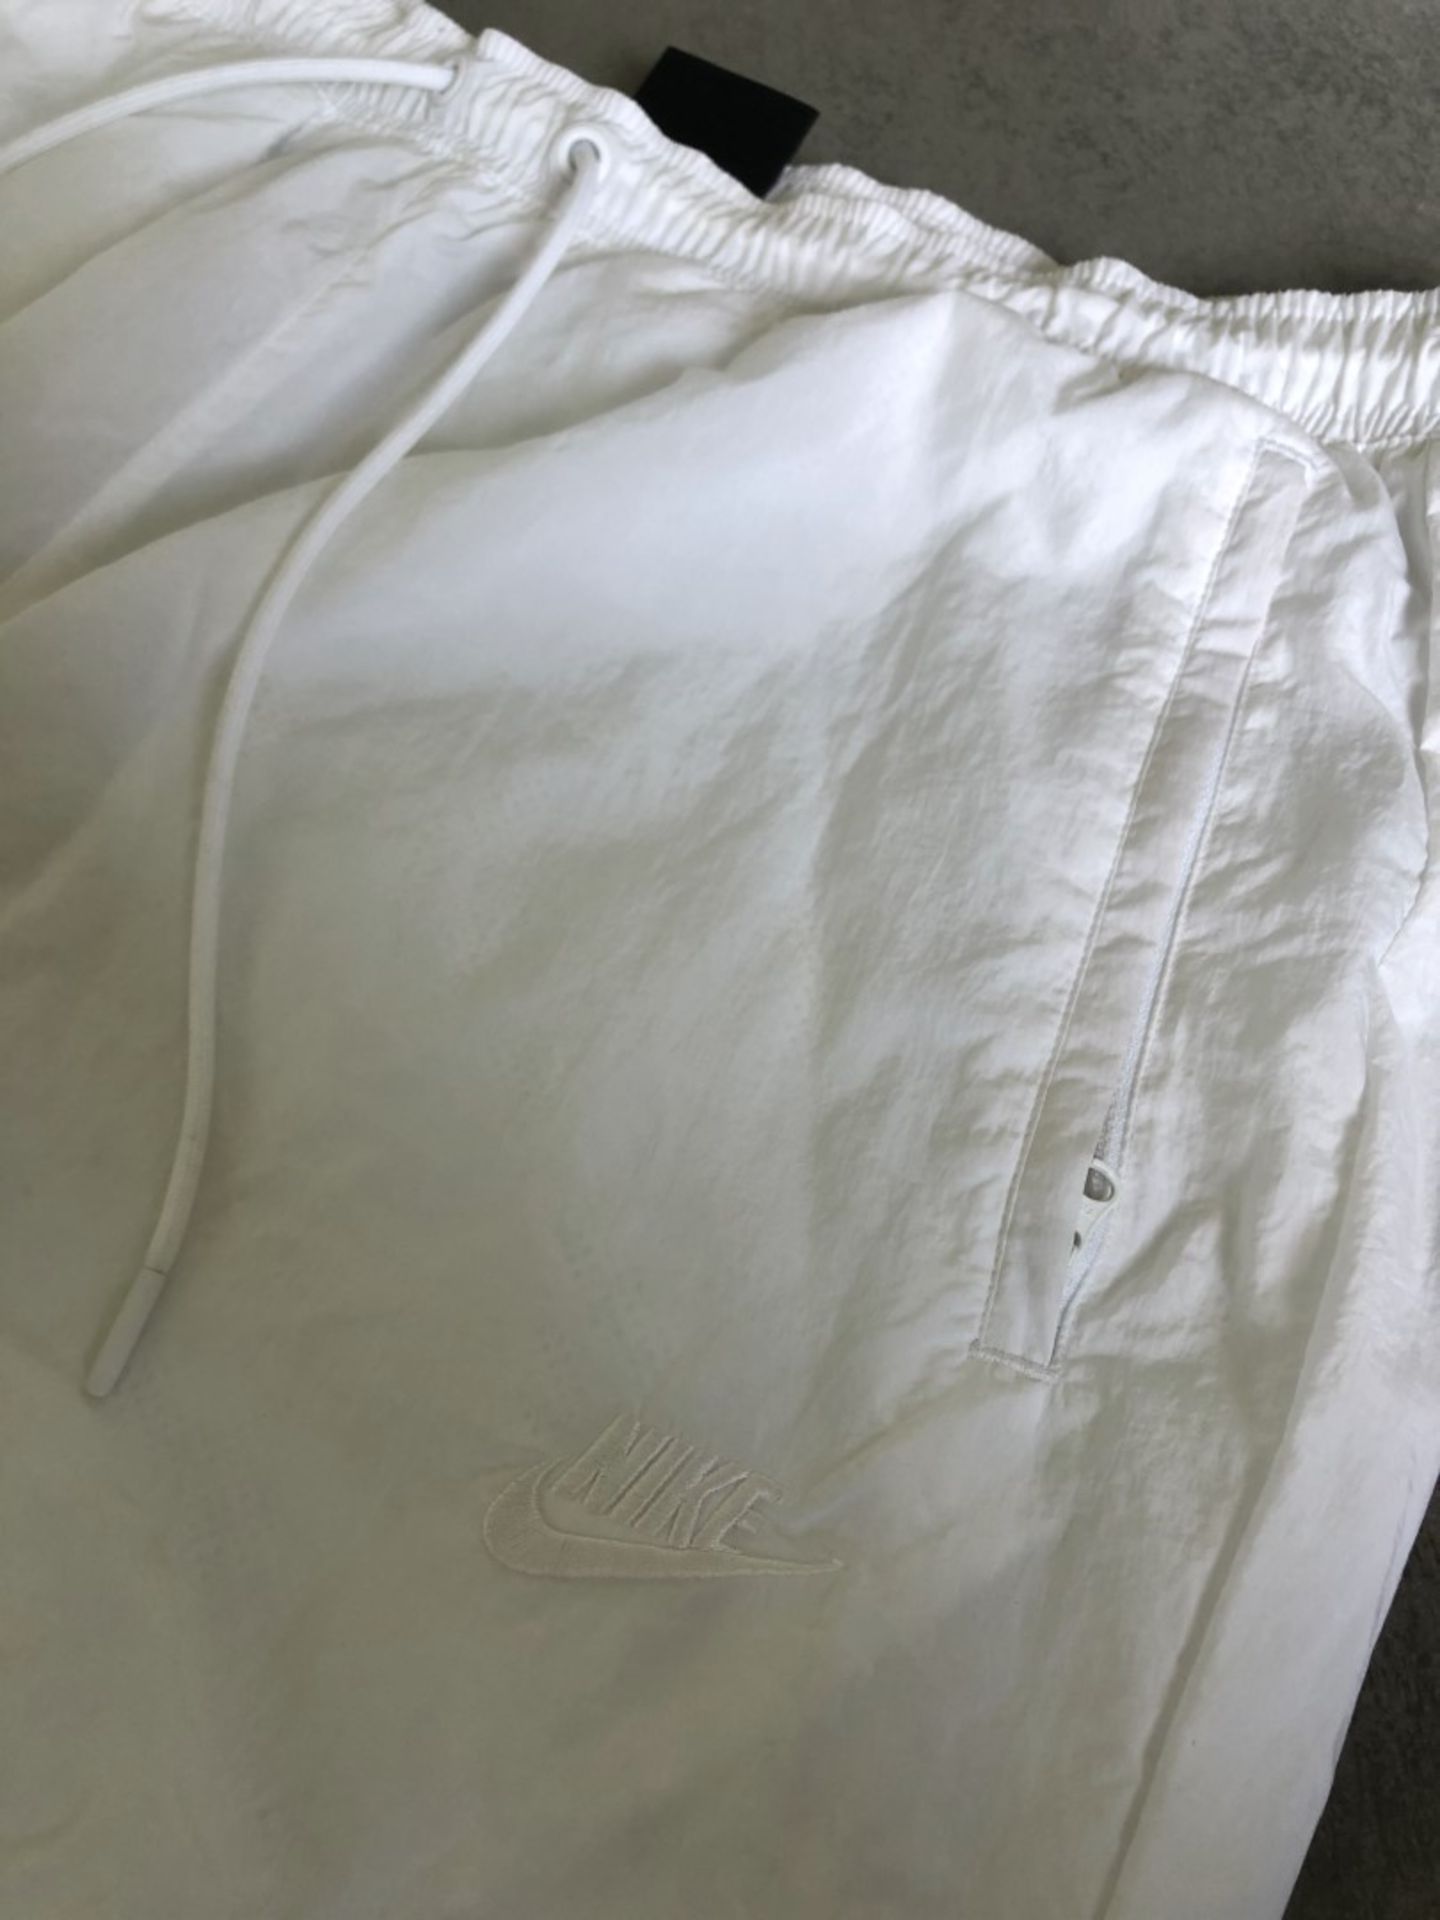 1 x Men's Genuine Nike Tracksuit Bottoms In White - Size (EU/UK): L/L - Preowned - Ref: JS119 - NO - Image 3 of 6